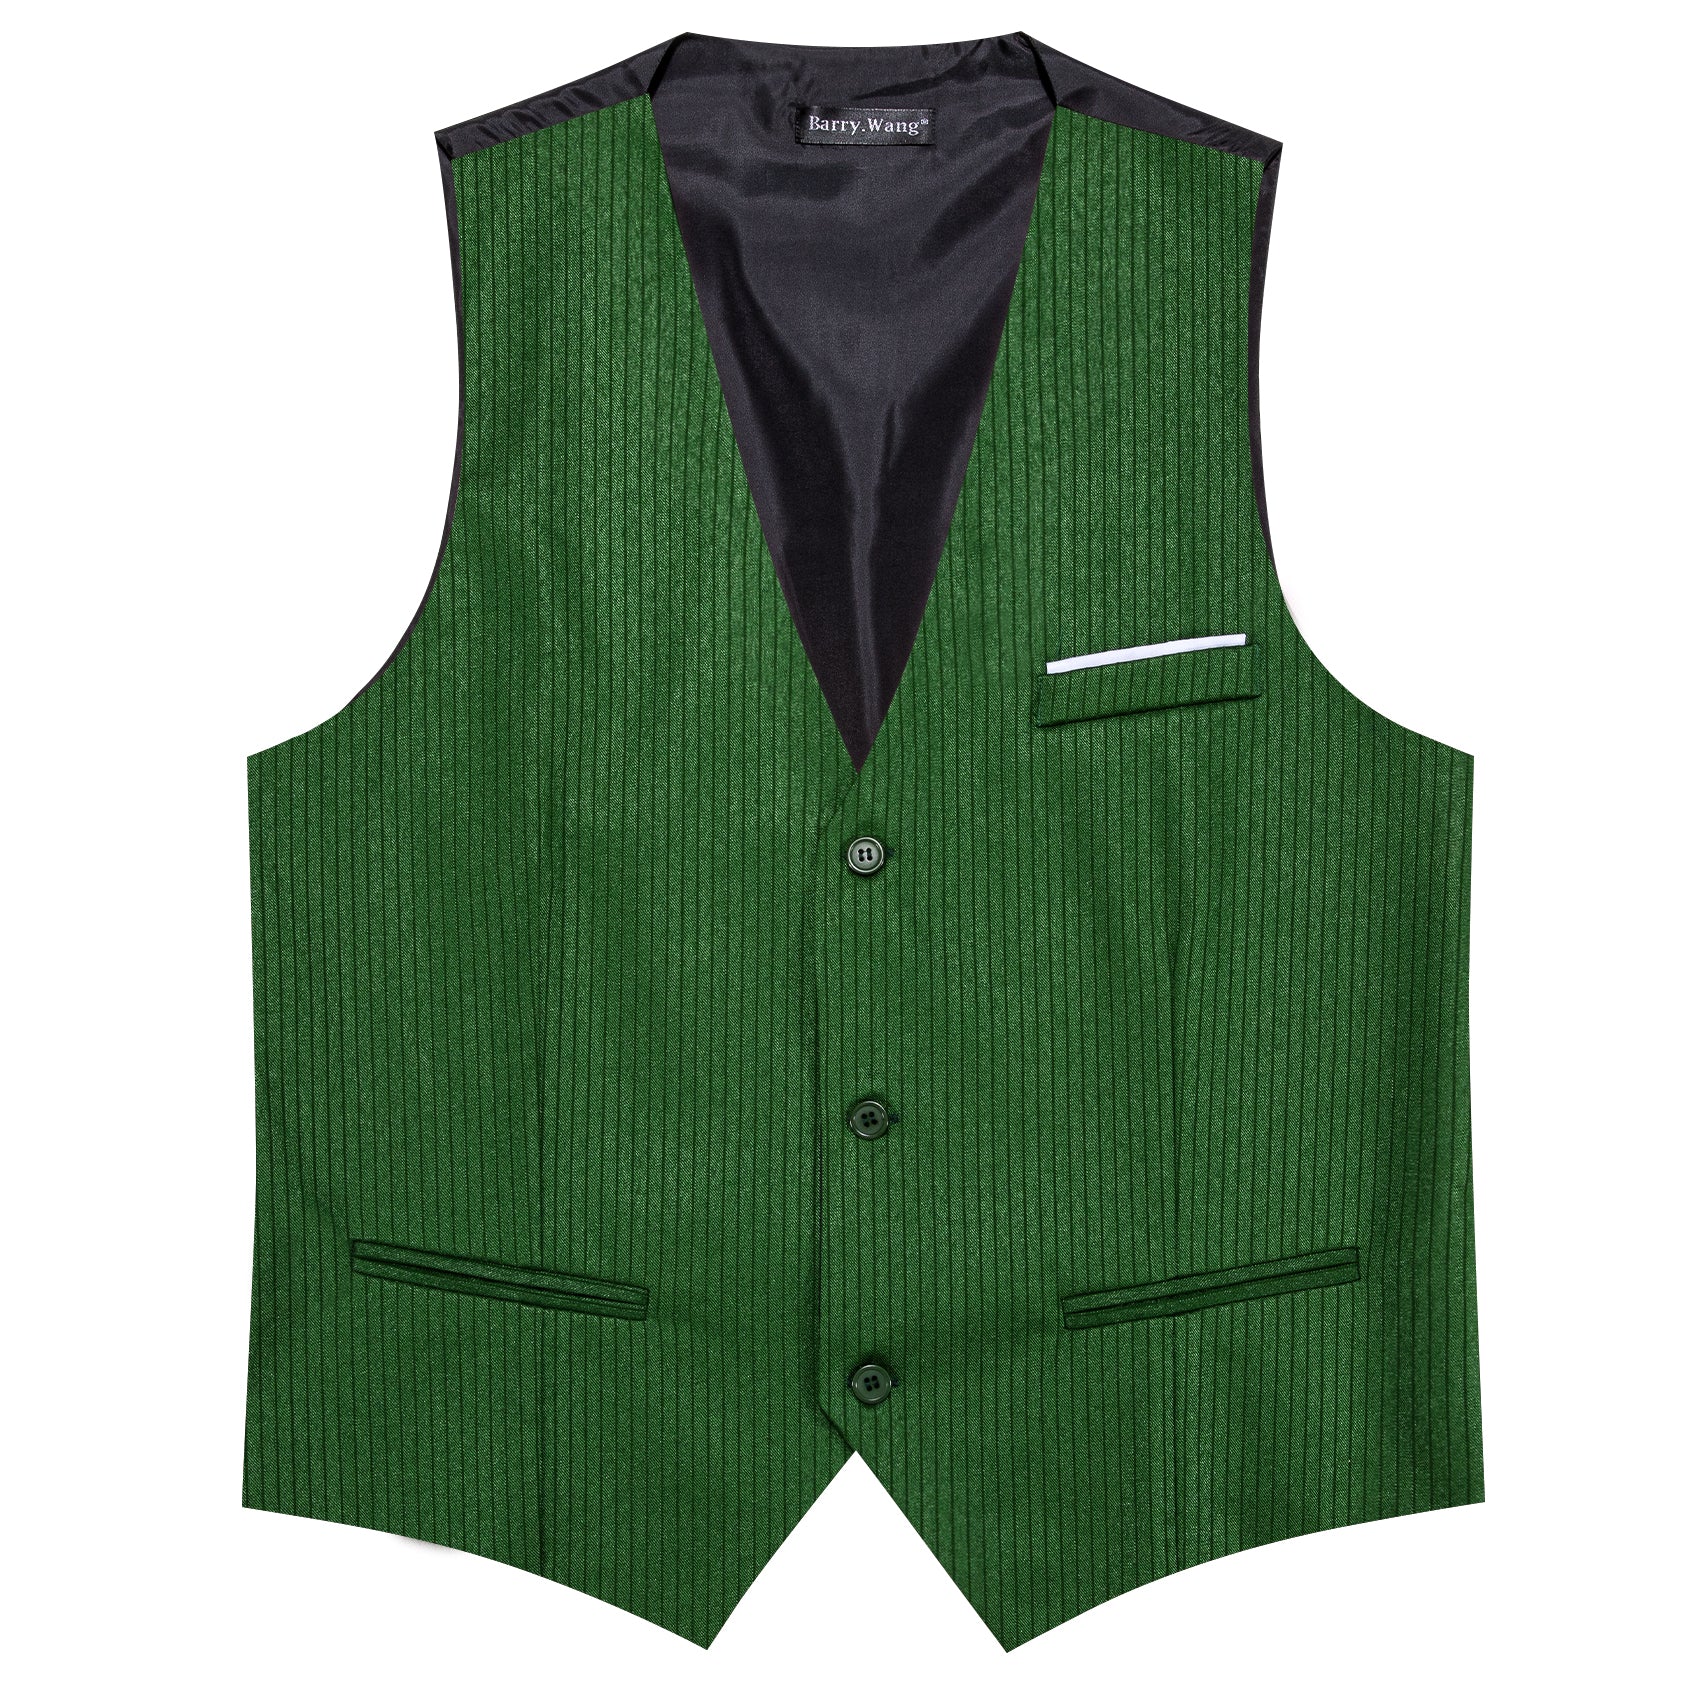 Barry.wang Grass Green Solid Business Vest Suit